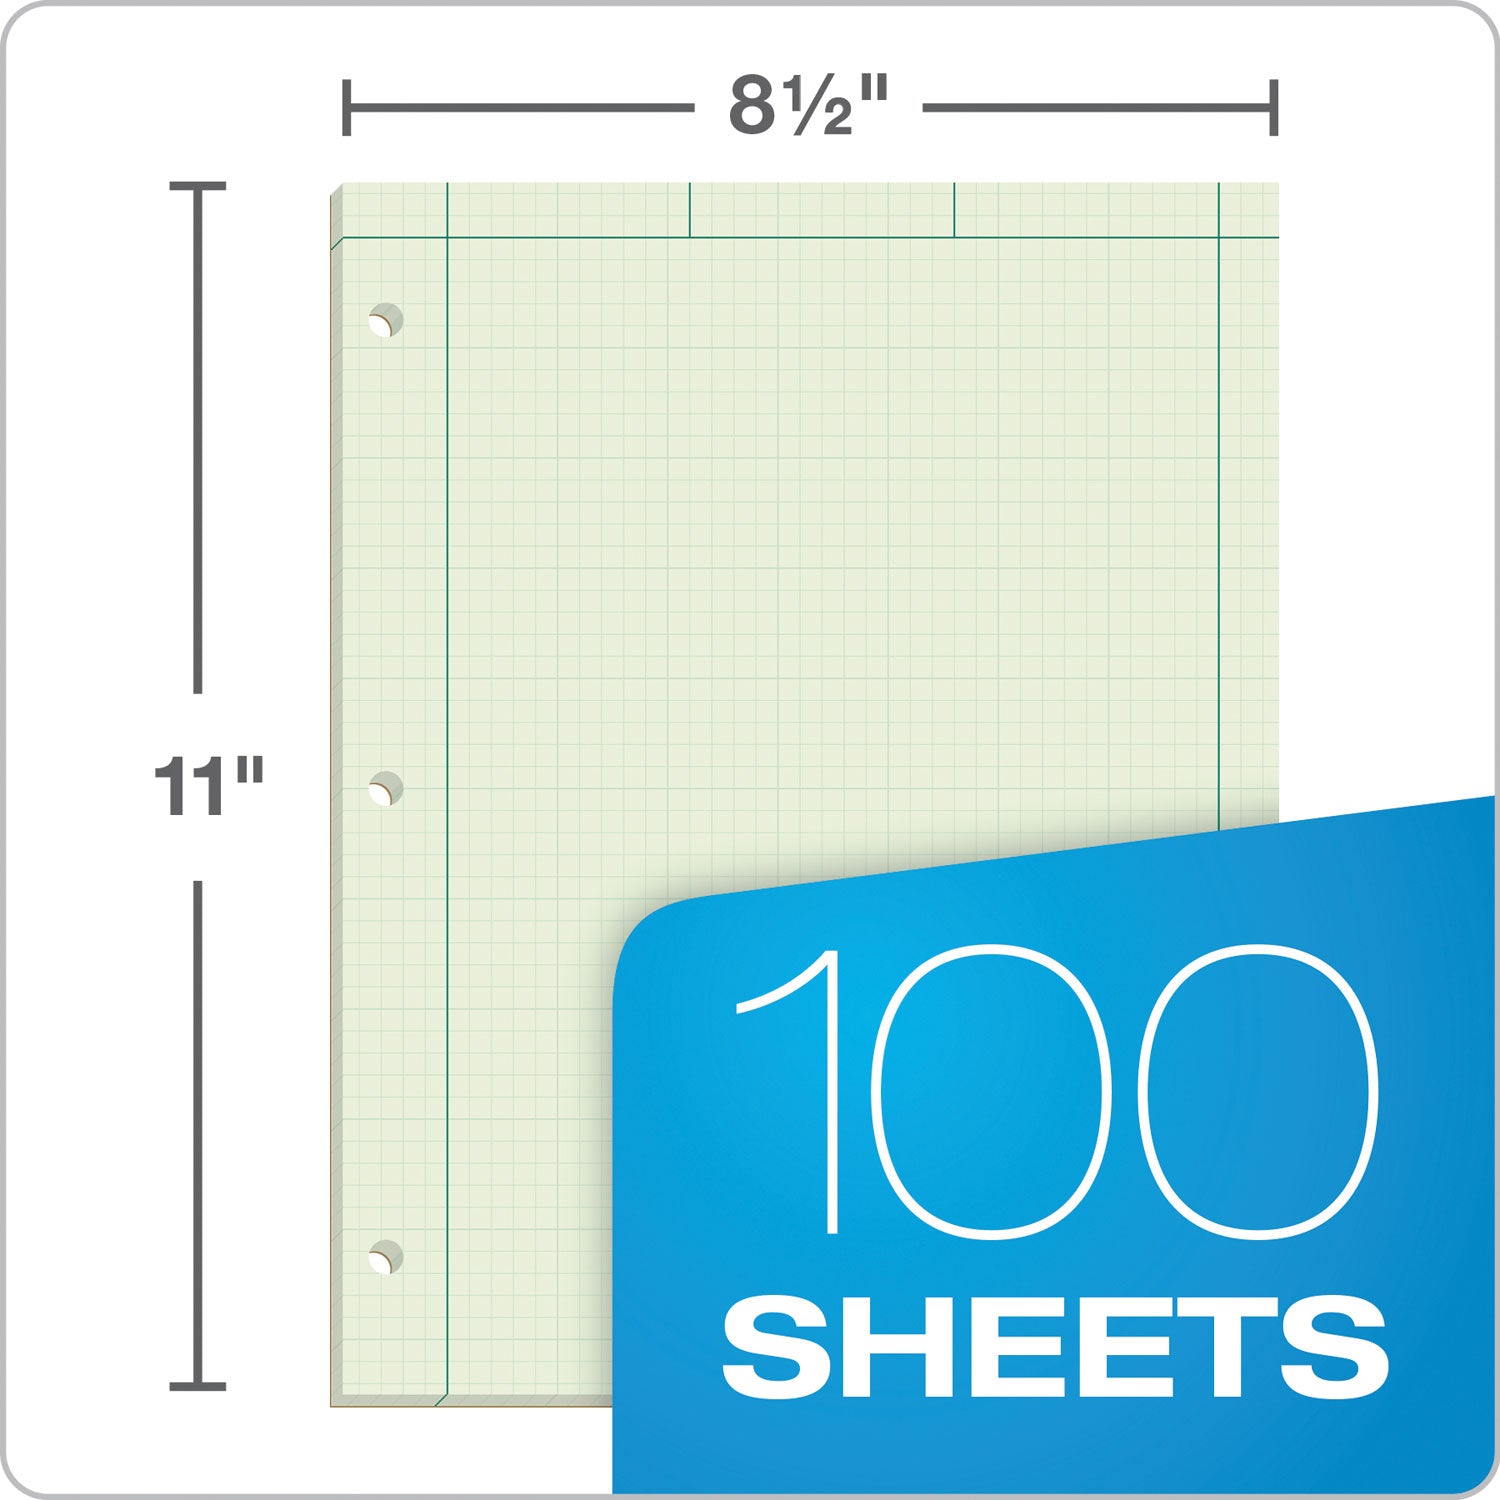 Engineering Computation Pads, Cross-Section Quad Rule (5 sq/in, 1 sq/in), Black/Green Cover, 100 Green-Tint 8.5 x 11 Sheets - 